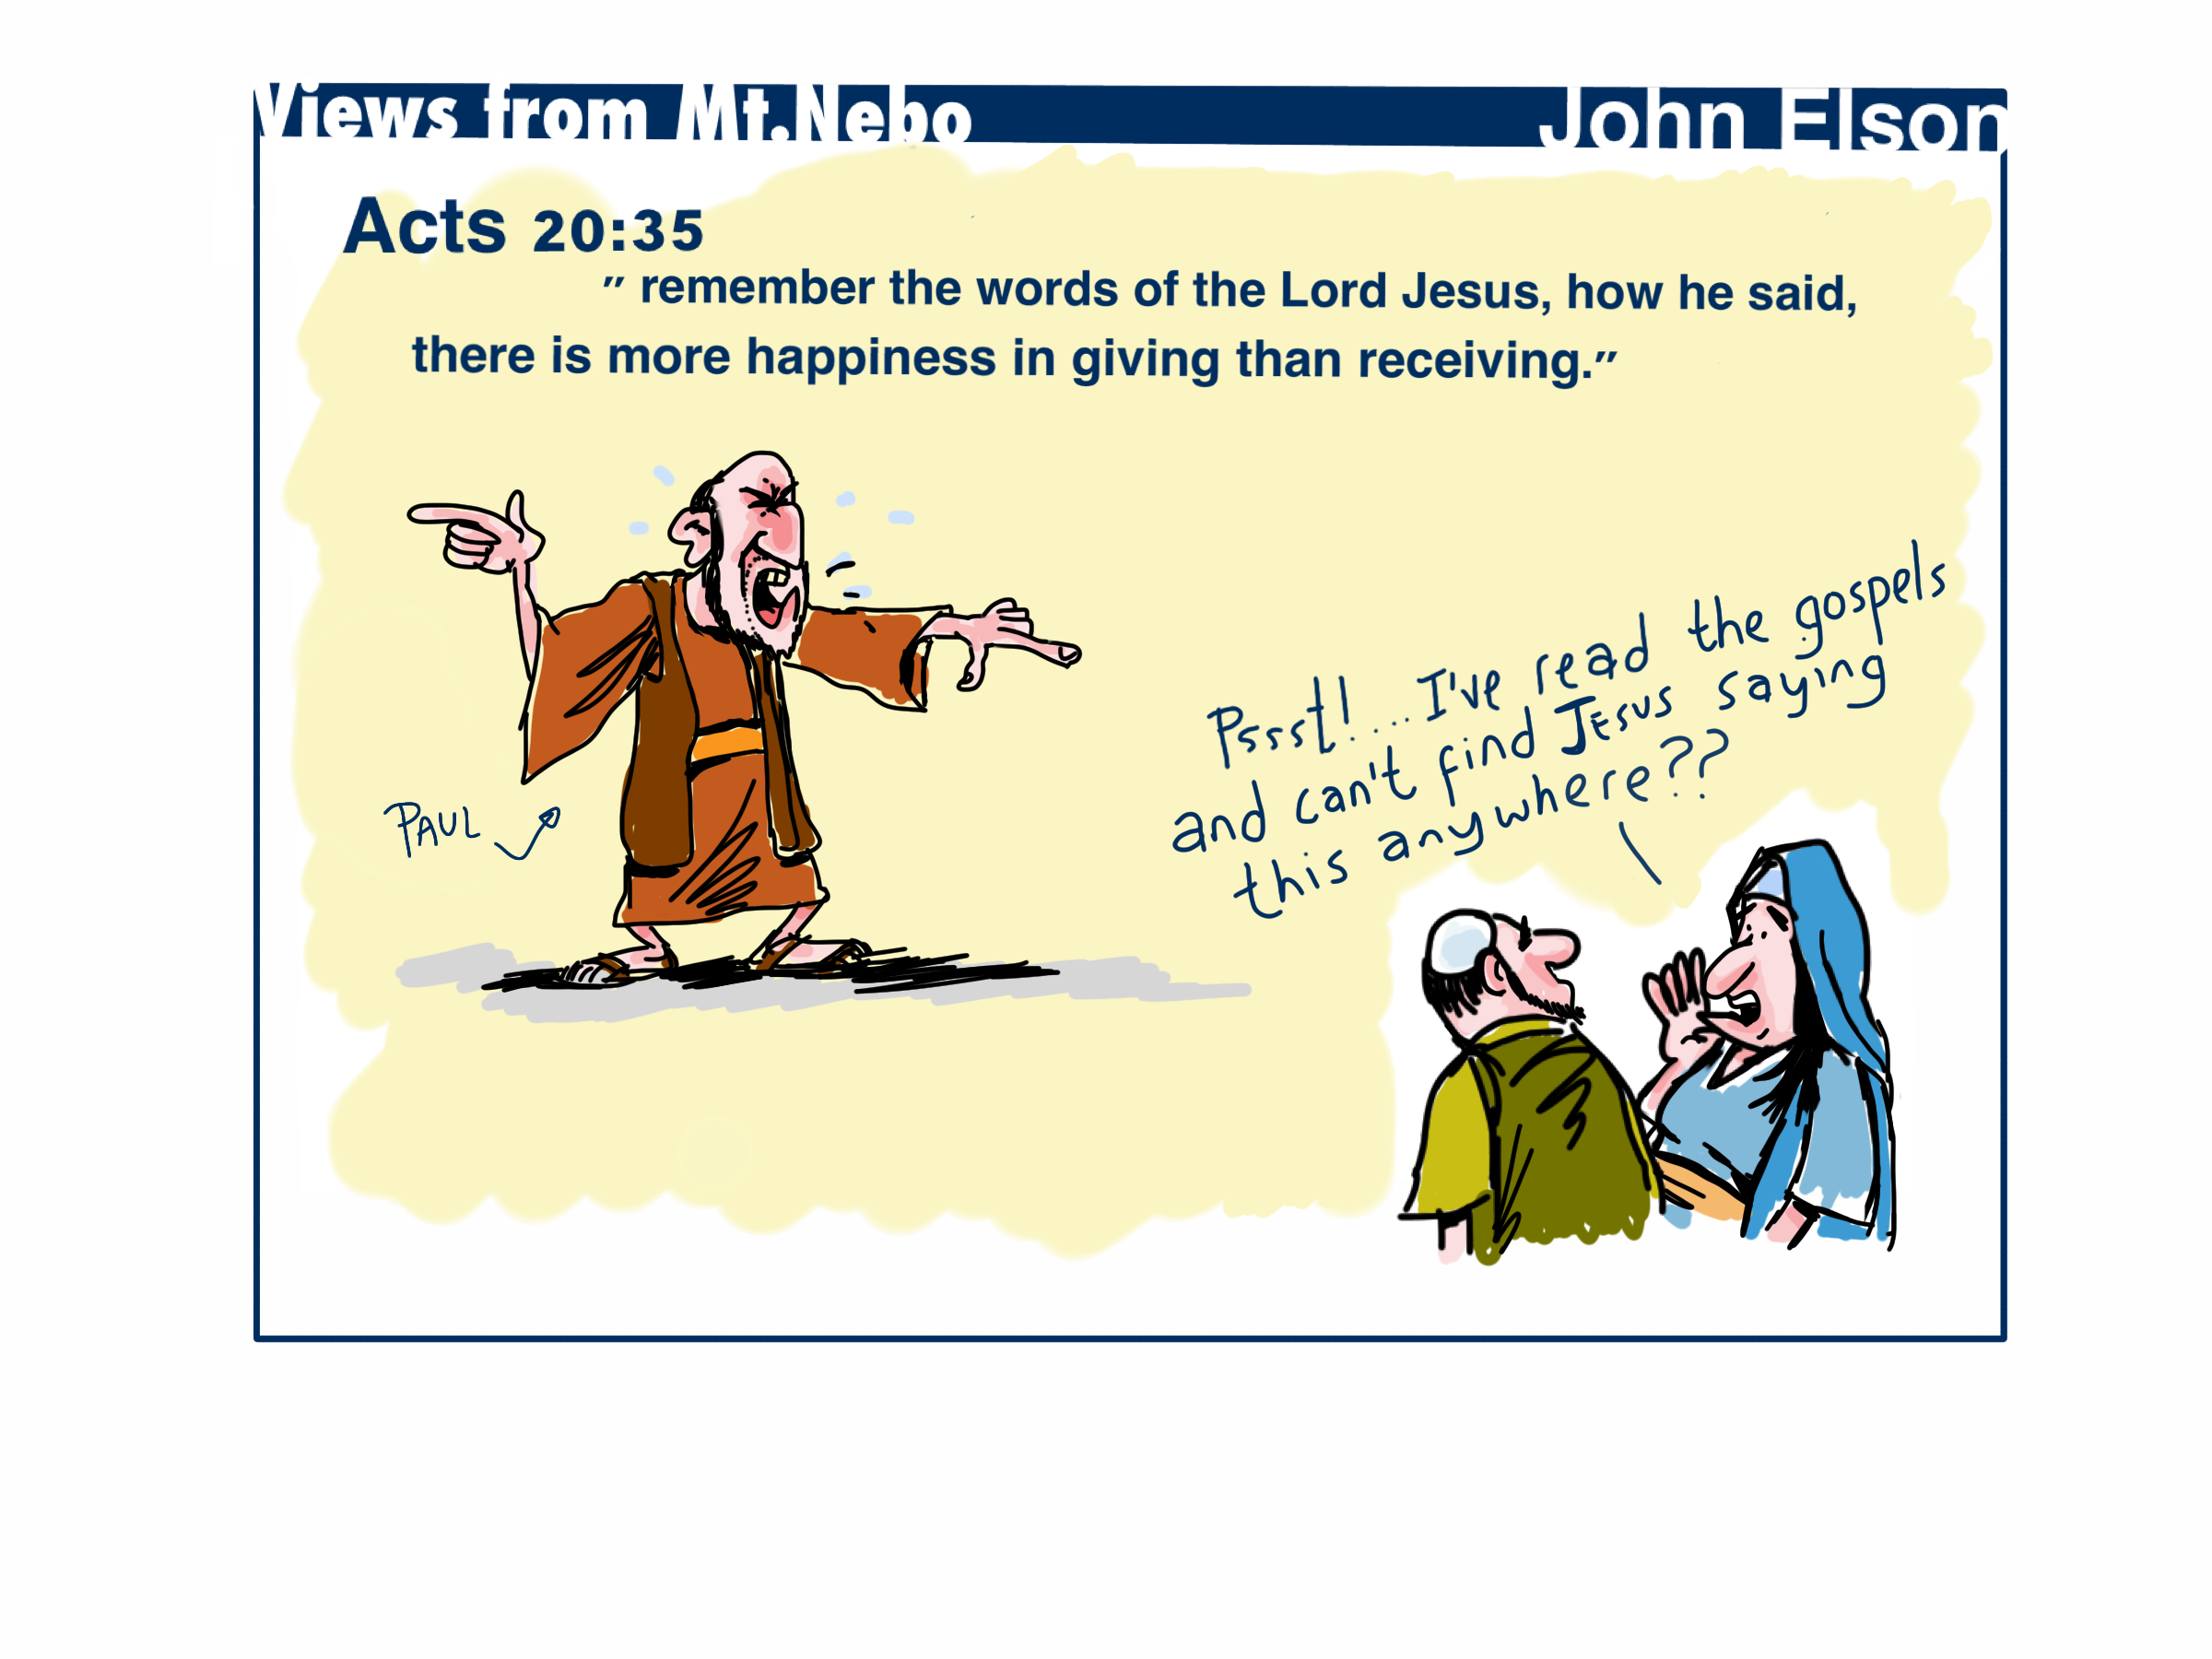 Apostle Paul cartoon Views from Mt a Nebo by JohnElsonArtist on DeviantArt